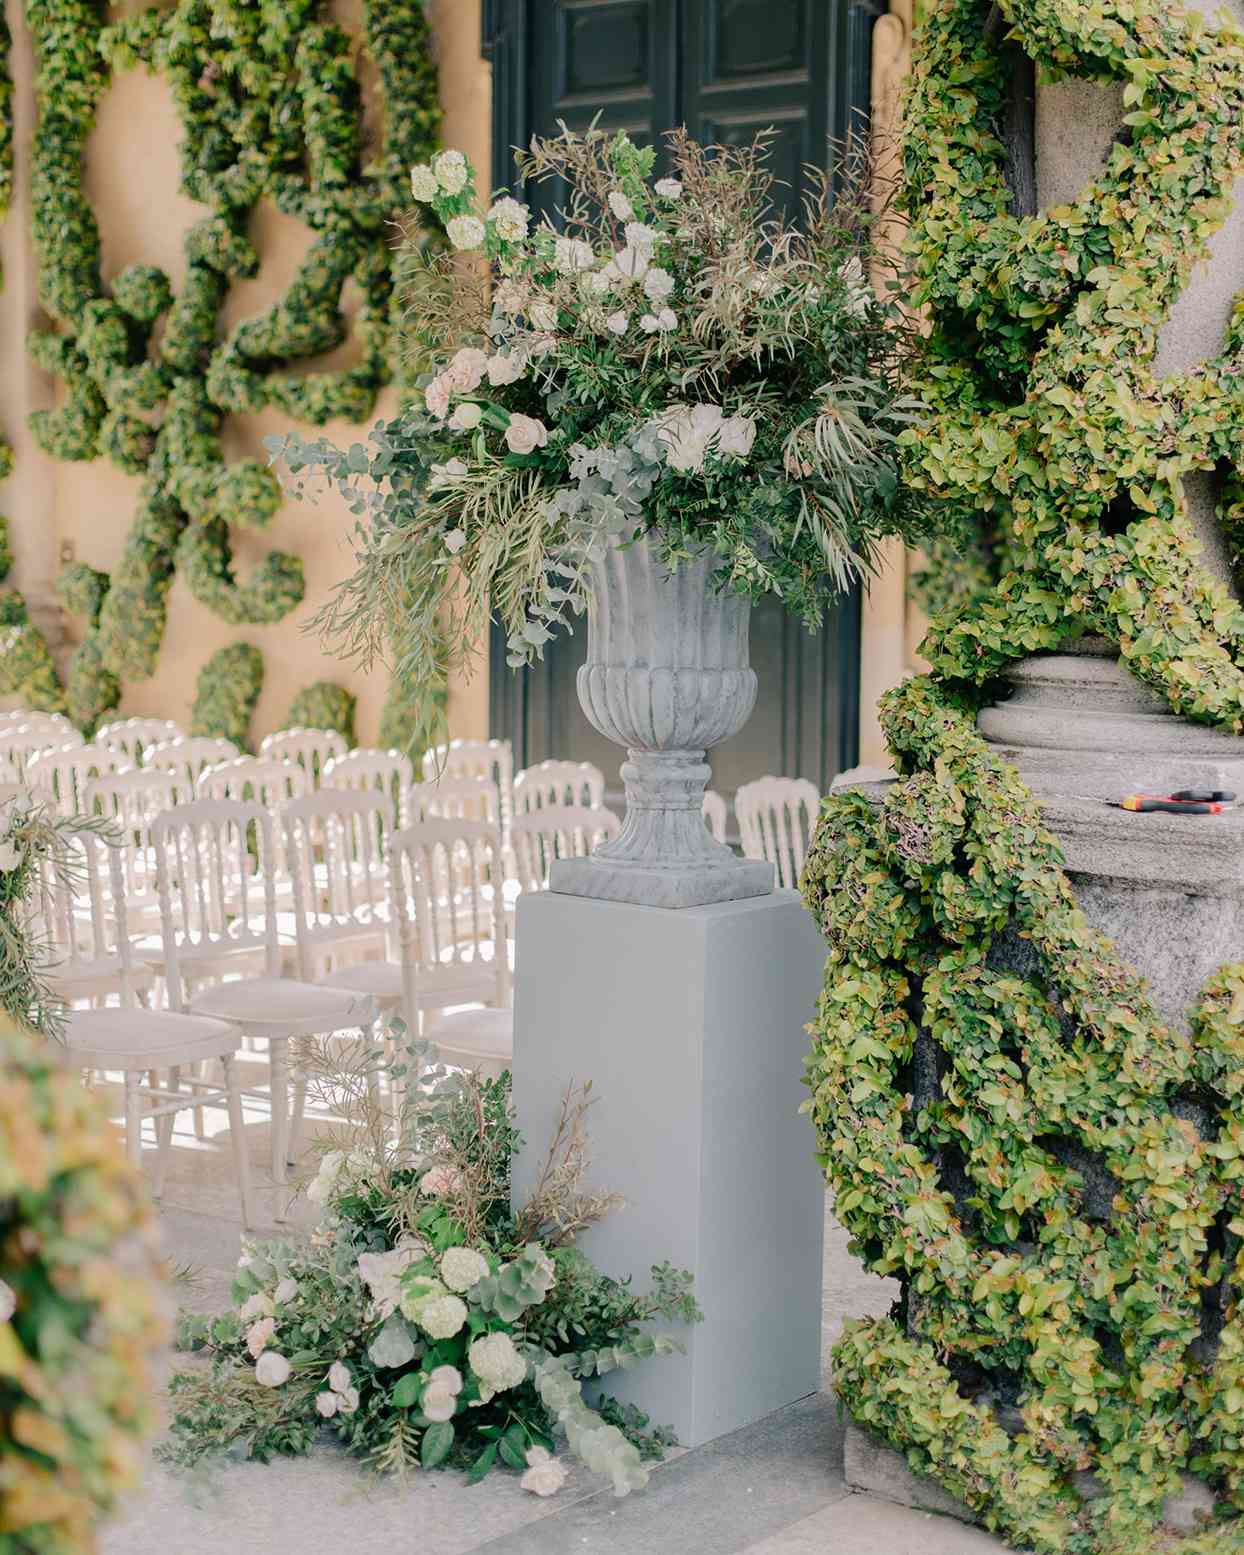 kiira arthur wedding ceremony space with large floral and greenery bouquets